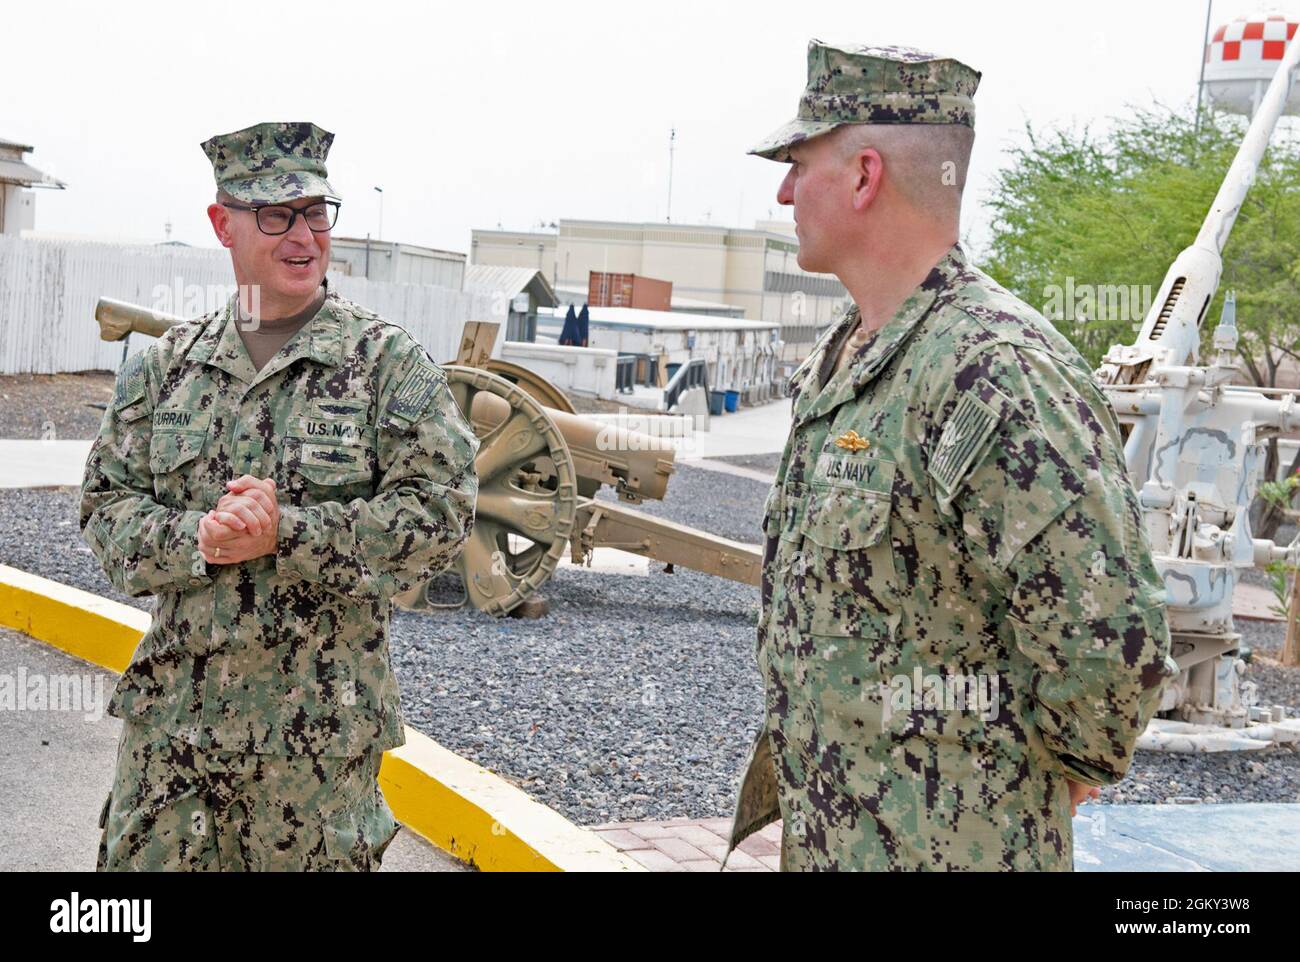 CAMP LEMONNIER, Djibouti (July 24, 2021) U.S. Navy Rear Adm. Michael Curran, Fleet Supply, Logistics, and Ordnance, U.S. Naval Forces Europe/Africa/Sixth Fleet, awards Lt.j.g. Webster McClure, from Stafford, Va., the Navy Expeditionary Supply Corps Officer Warfare pin, July 24, 2021. Camp Lemonnier is an operational installation that enables U.S., allied and partner nation forces to be where and when they are needed to ensure security in Europe, Africa and Southwest Asia. Stock Photo